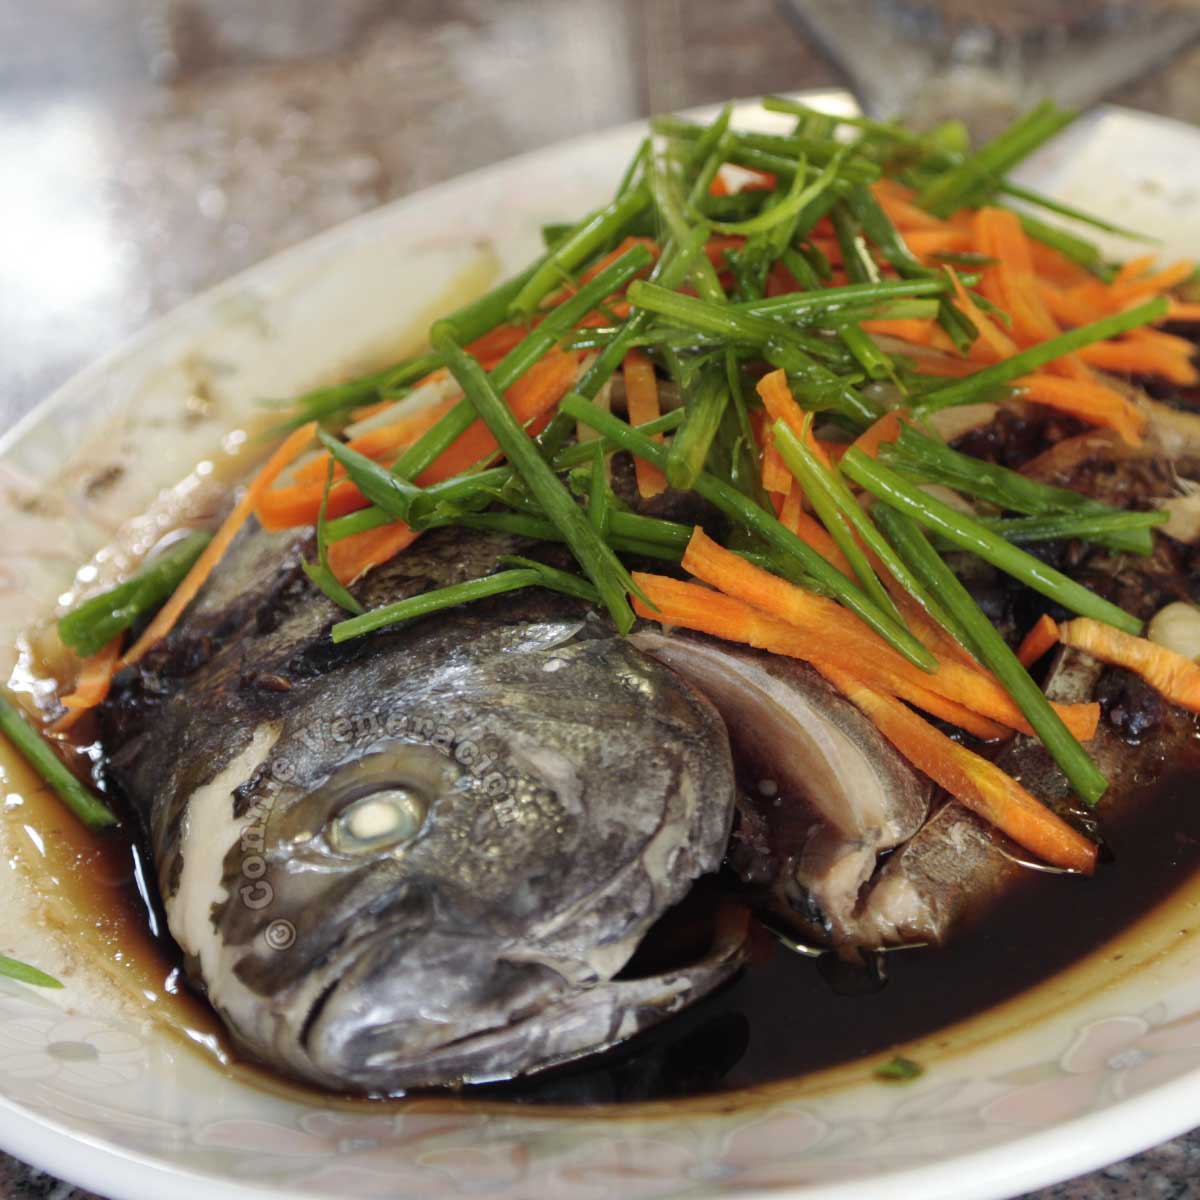 Steamed pompano with black bean garlic sauce garnished with julienned carrot and scallions